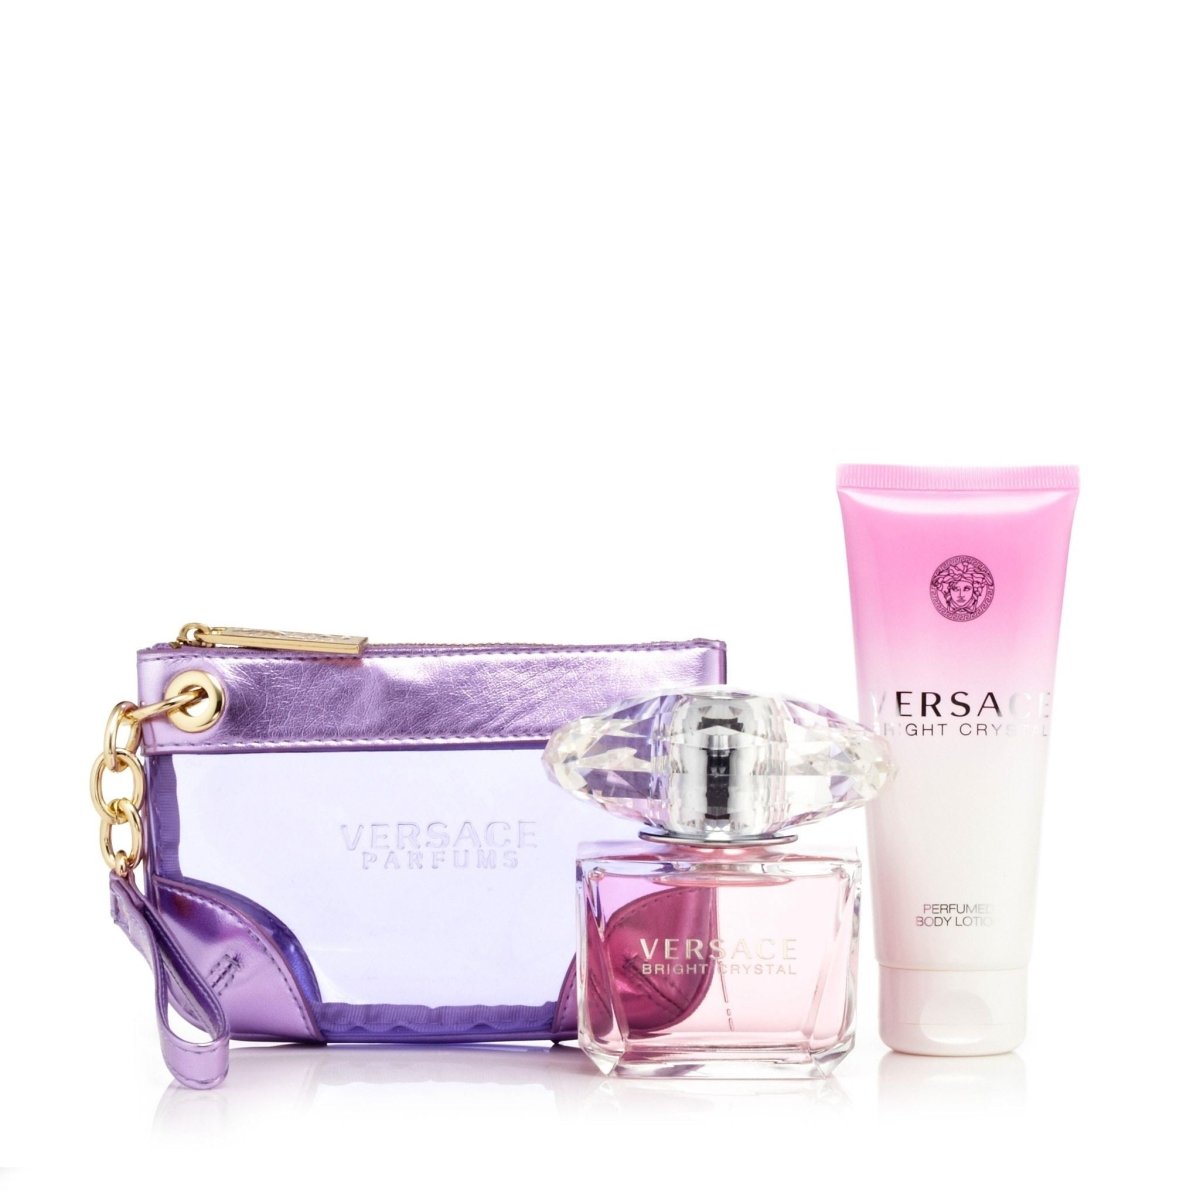 Versace Bright Crystal With Pochette Gift Set Womens 3.4 oz. 